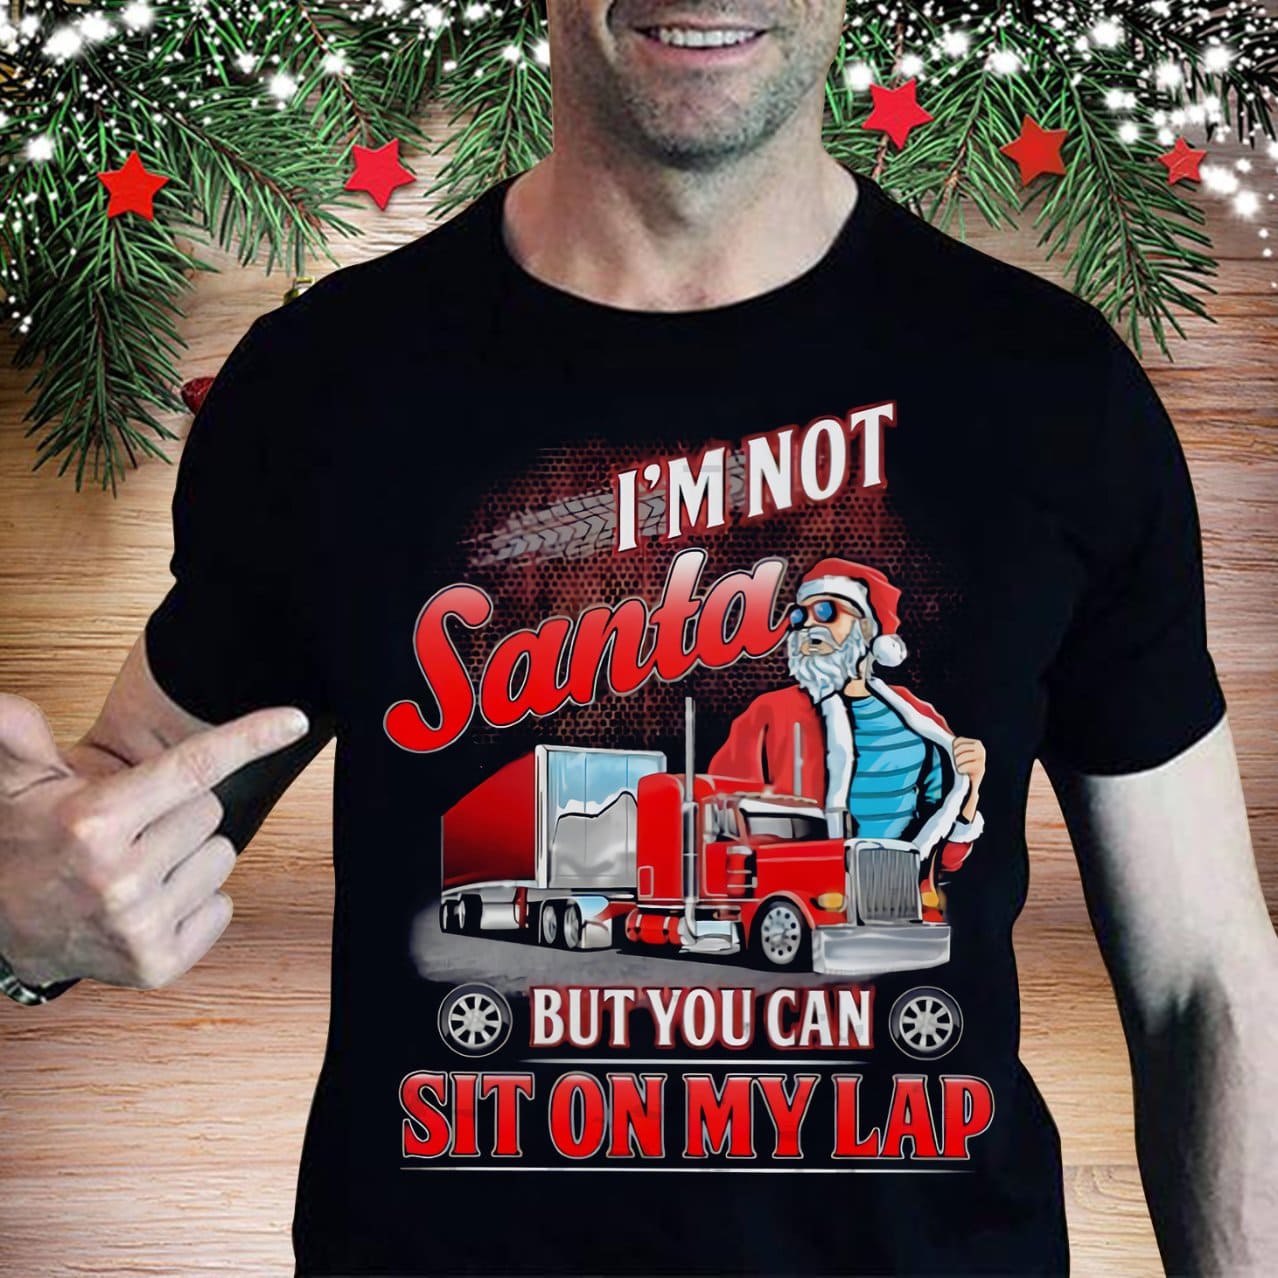 I'm not Santa but you can sit on my lap - Santa the truck driver, Christmas gift for trucker